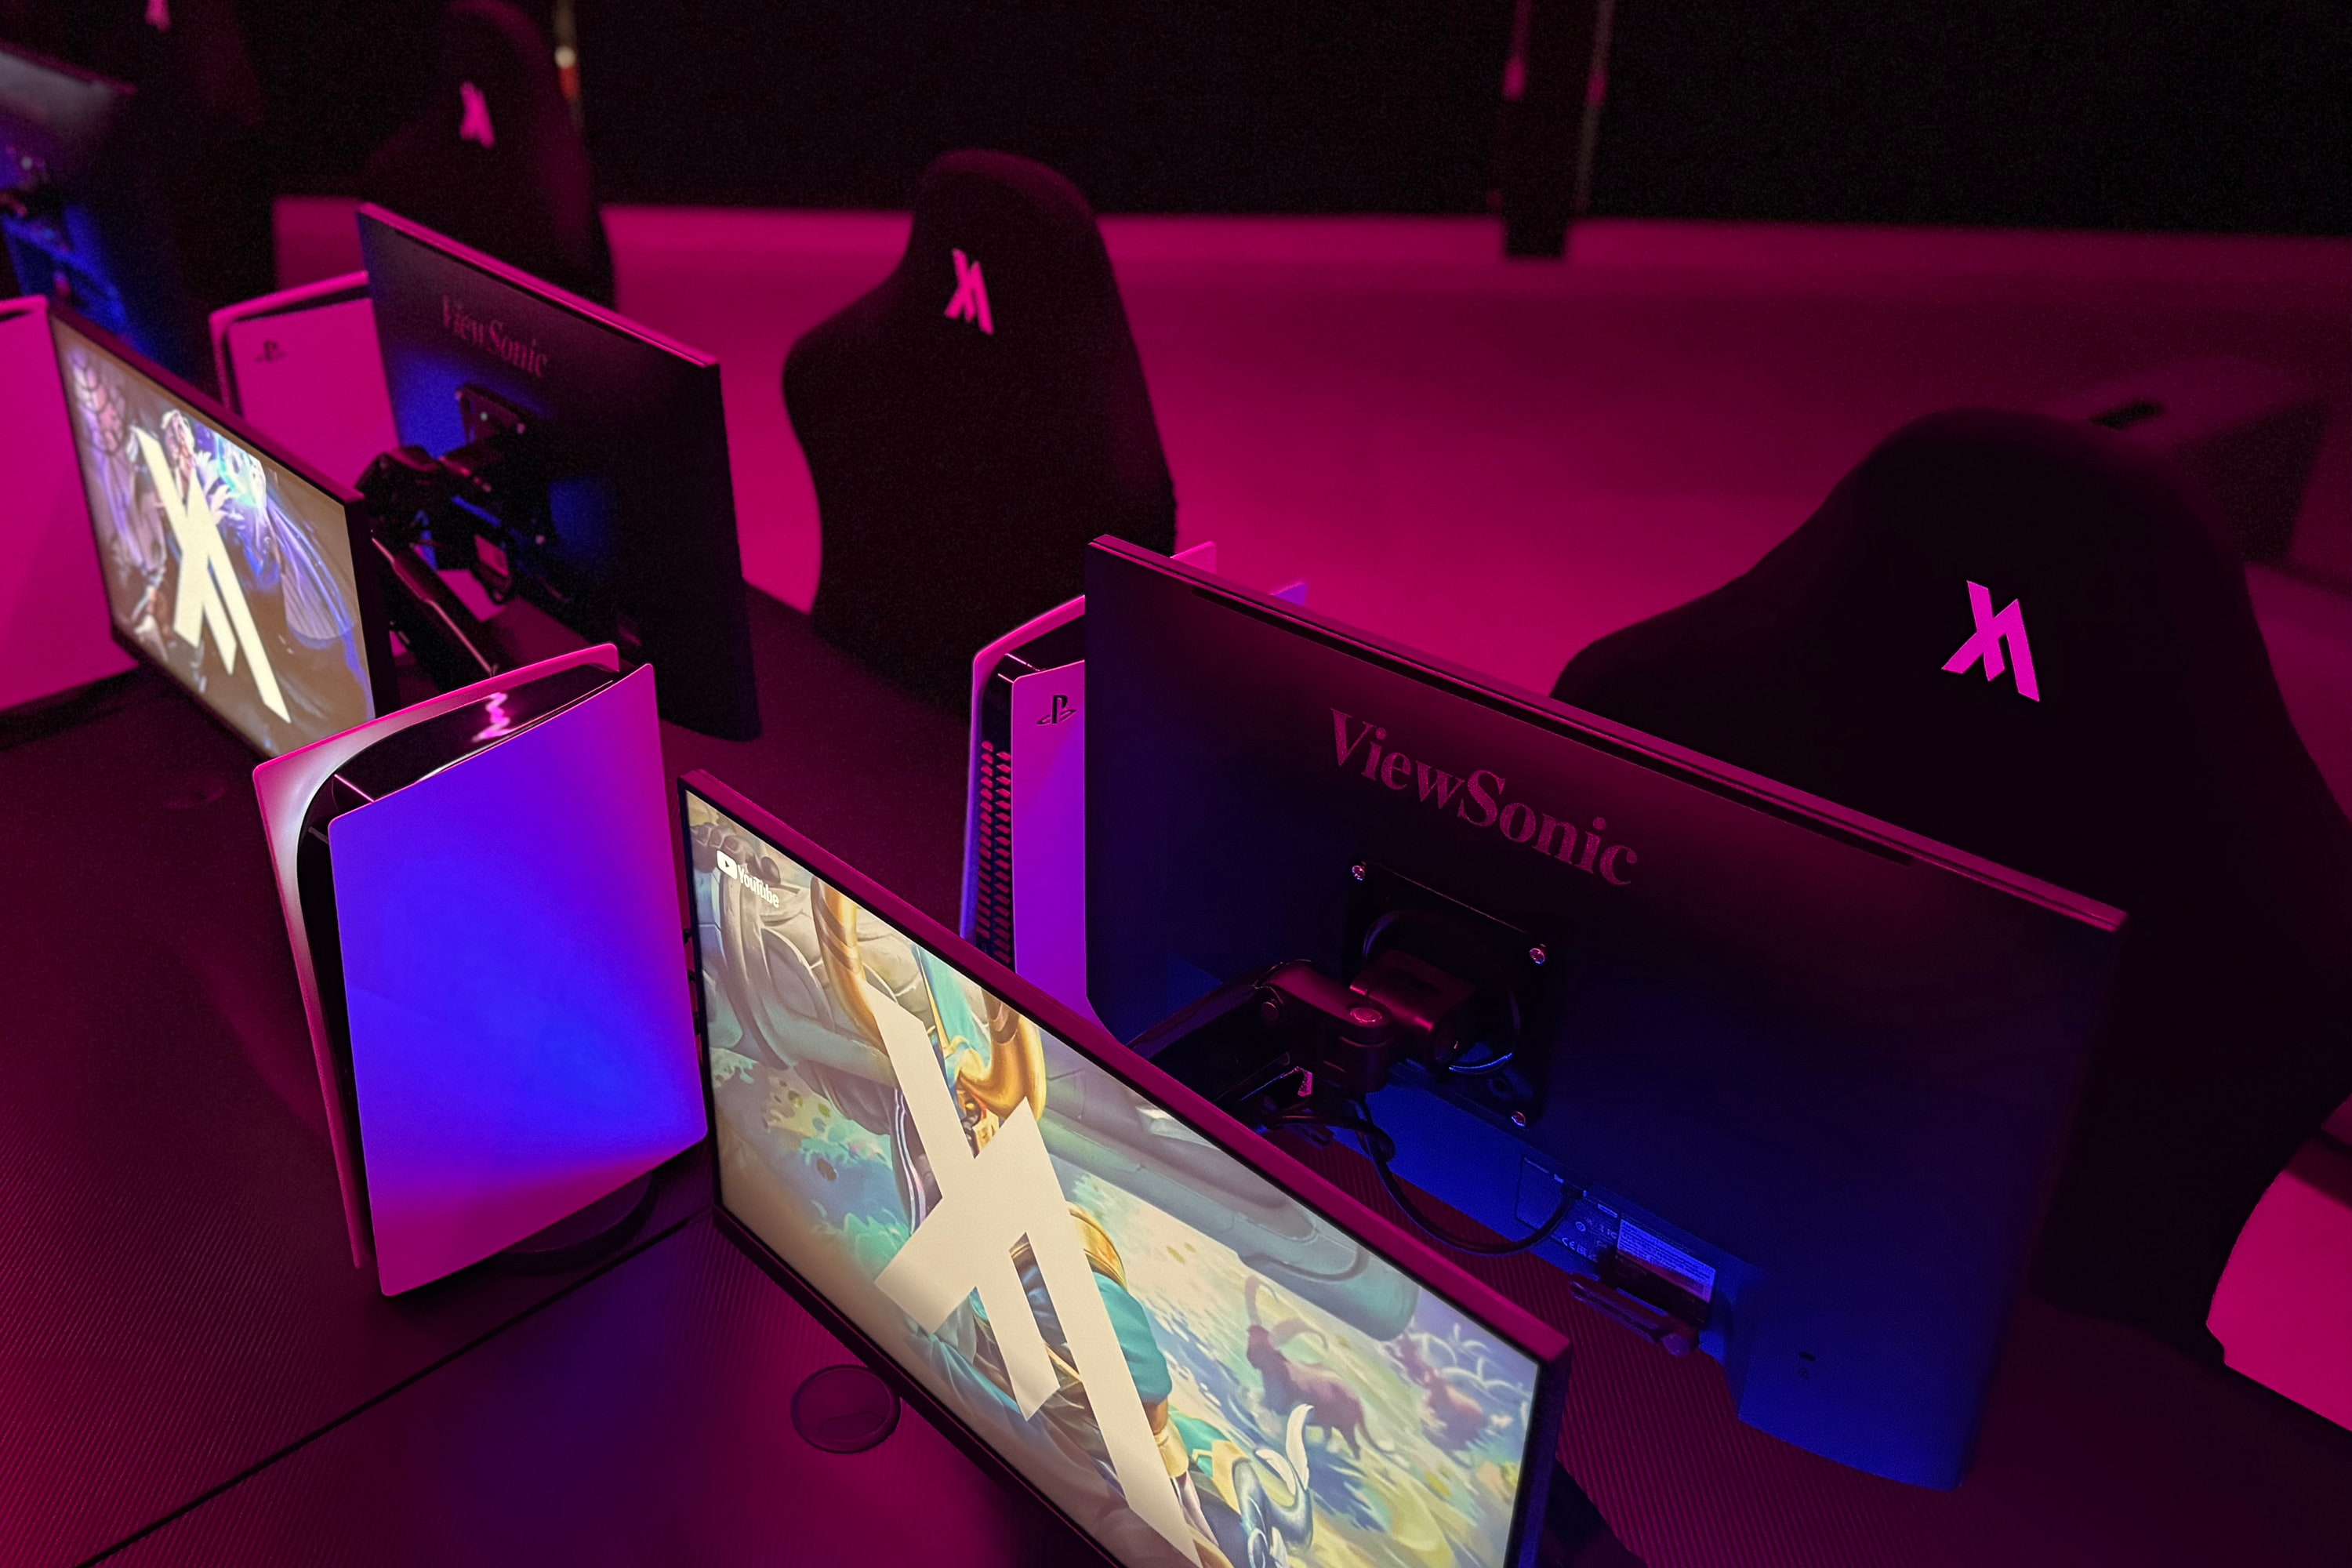 ViewSonic enhances FATE's training facility with premium gaming monitors for peak performance.